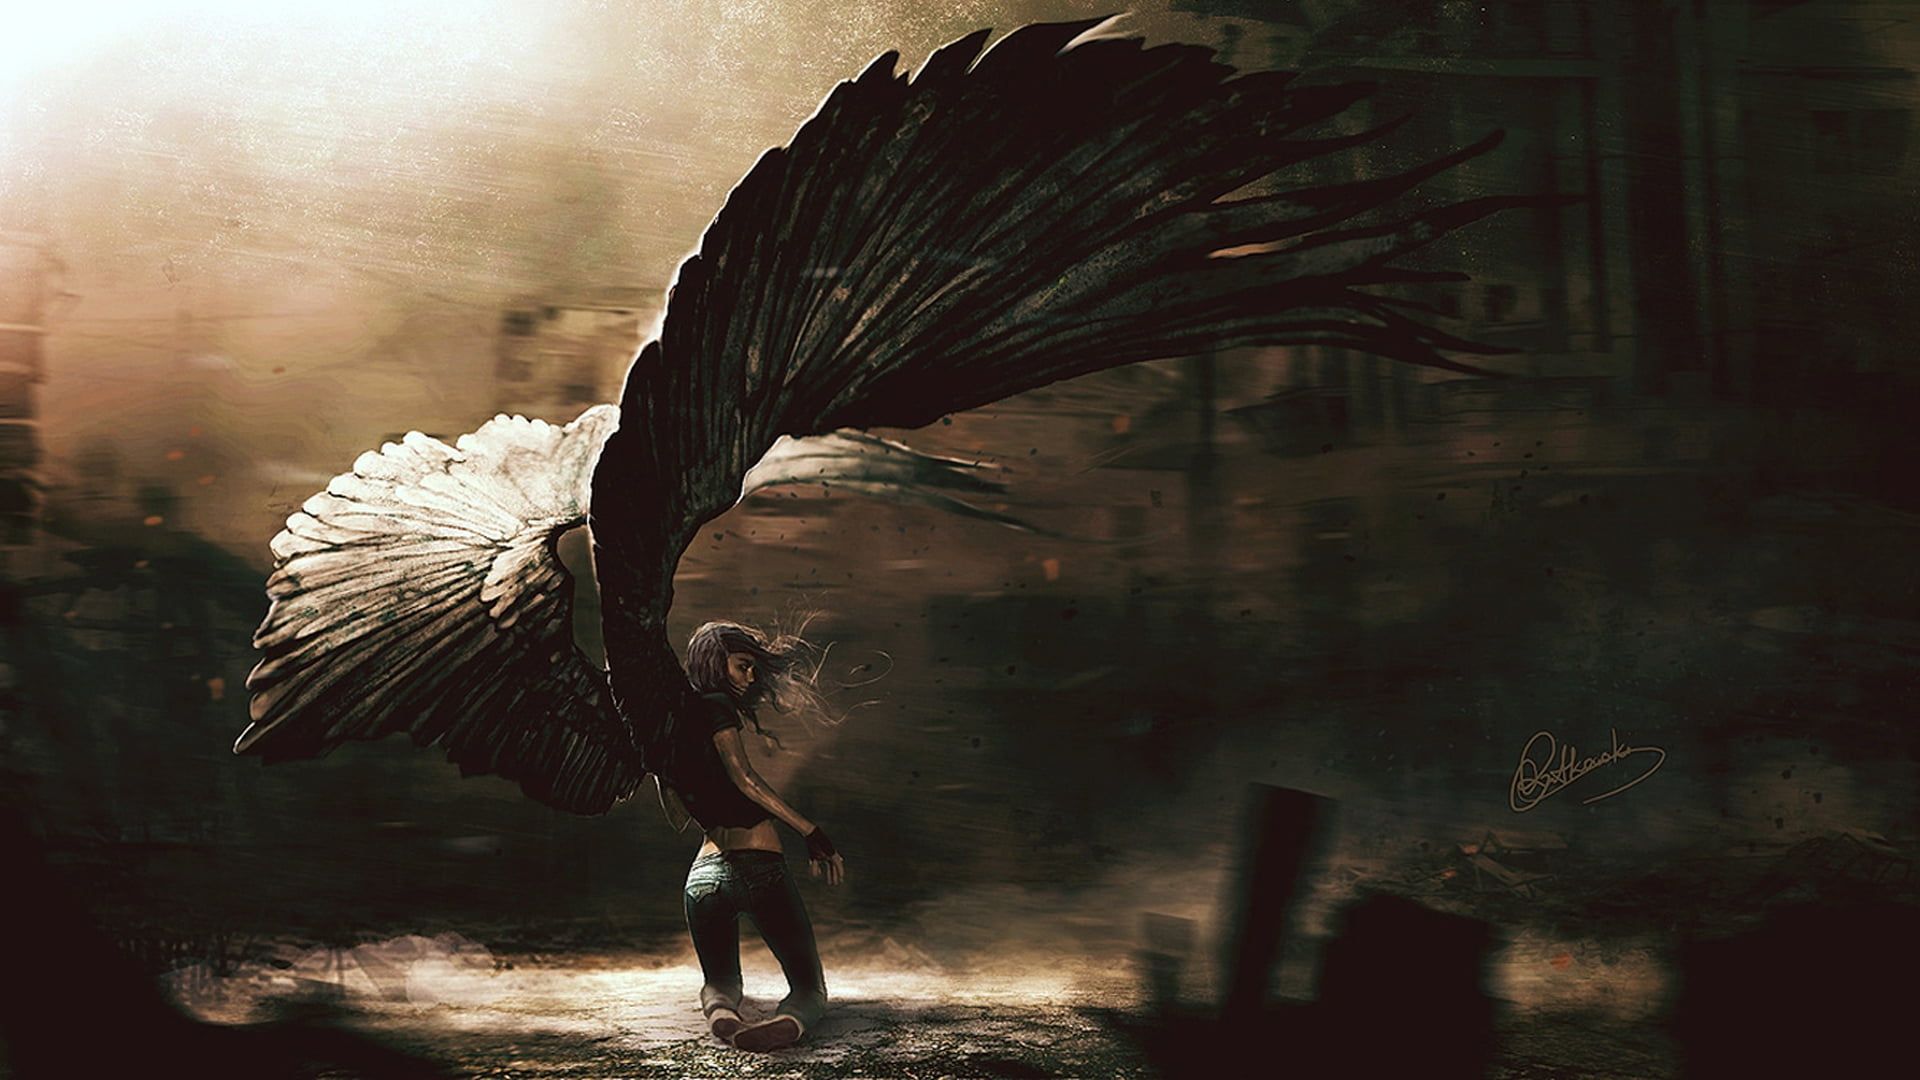 Girl With Wings Angel Wallpapers